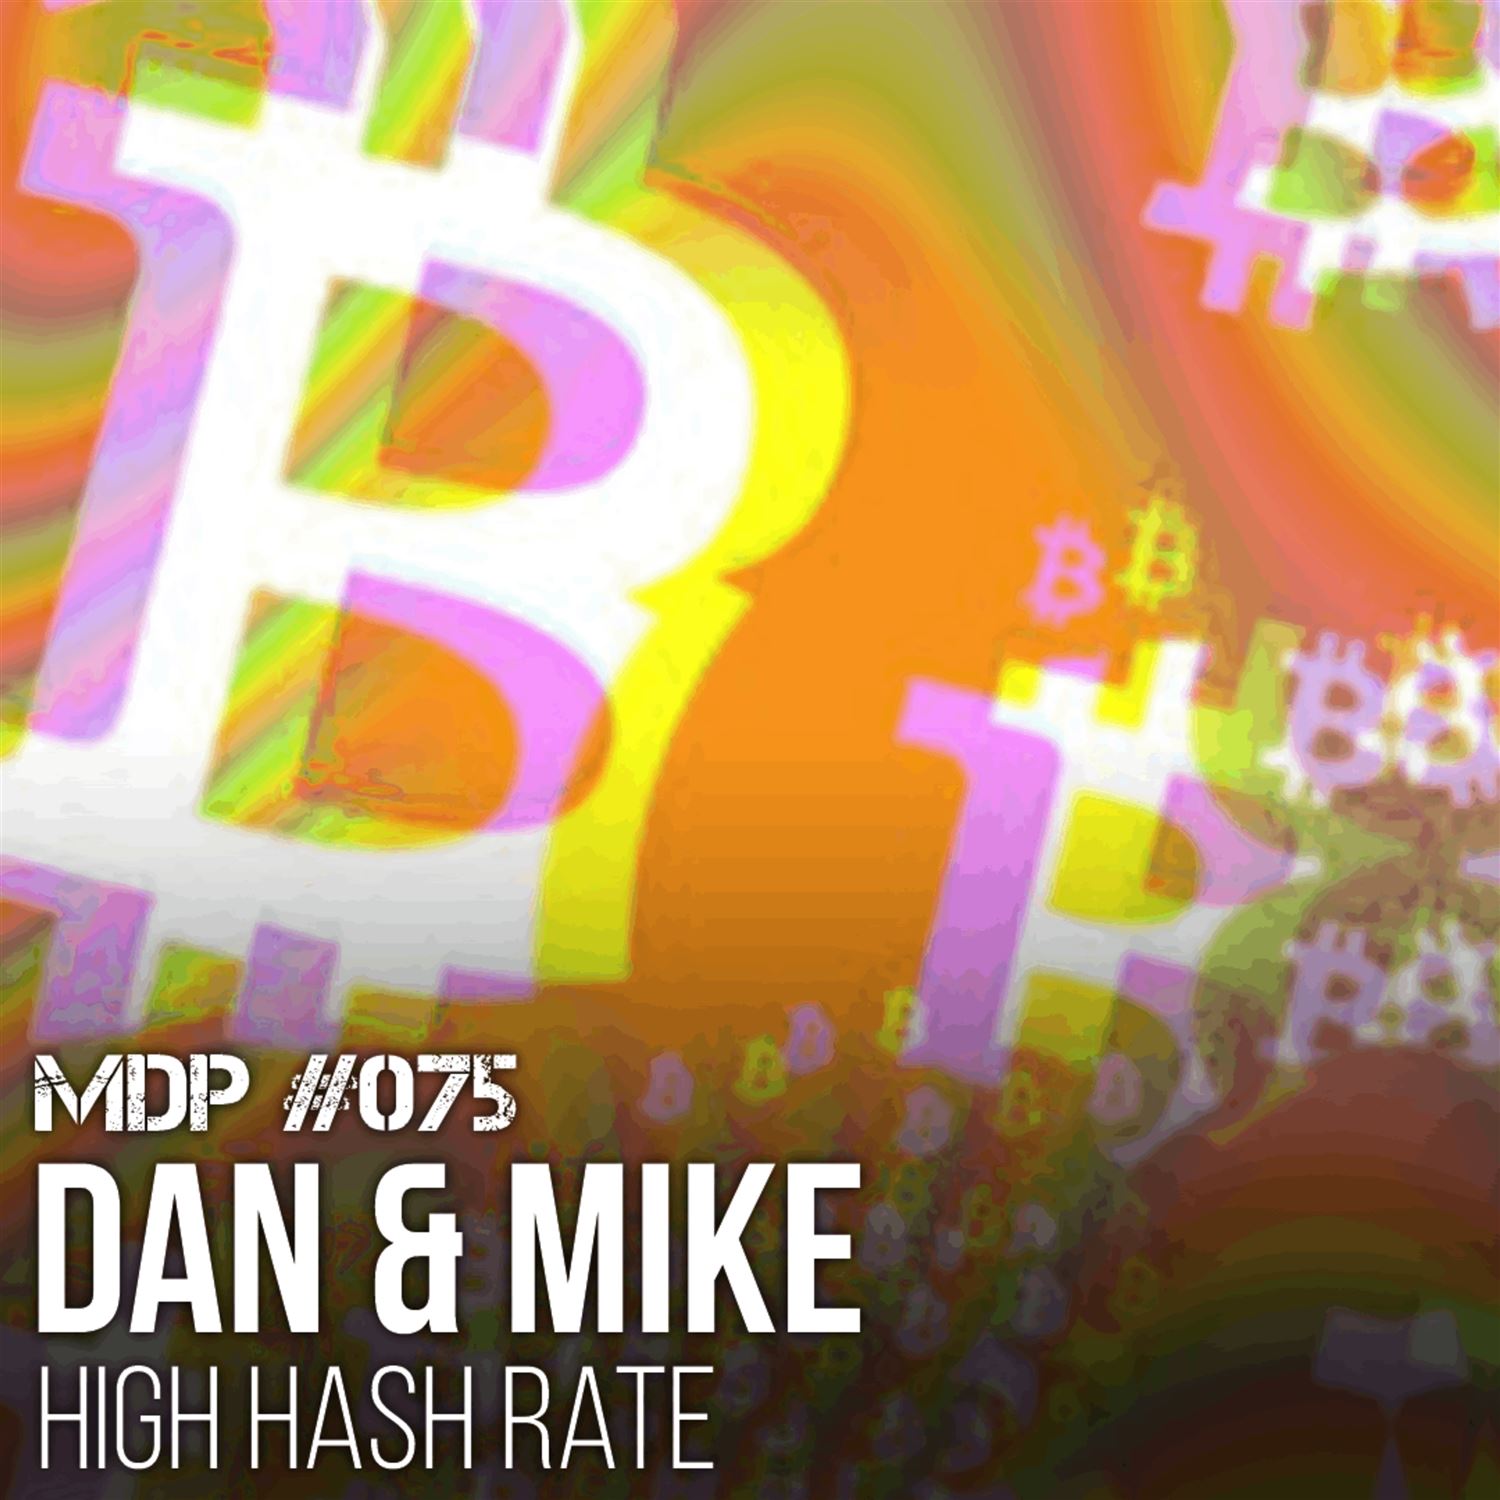 075 Dan & Mike - High Hash Rate Podcast